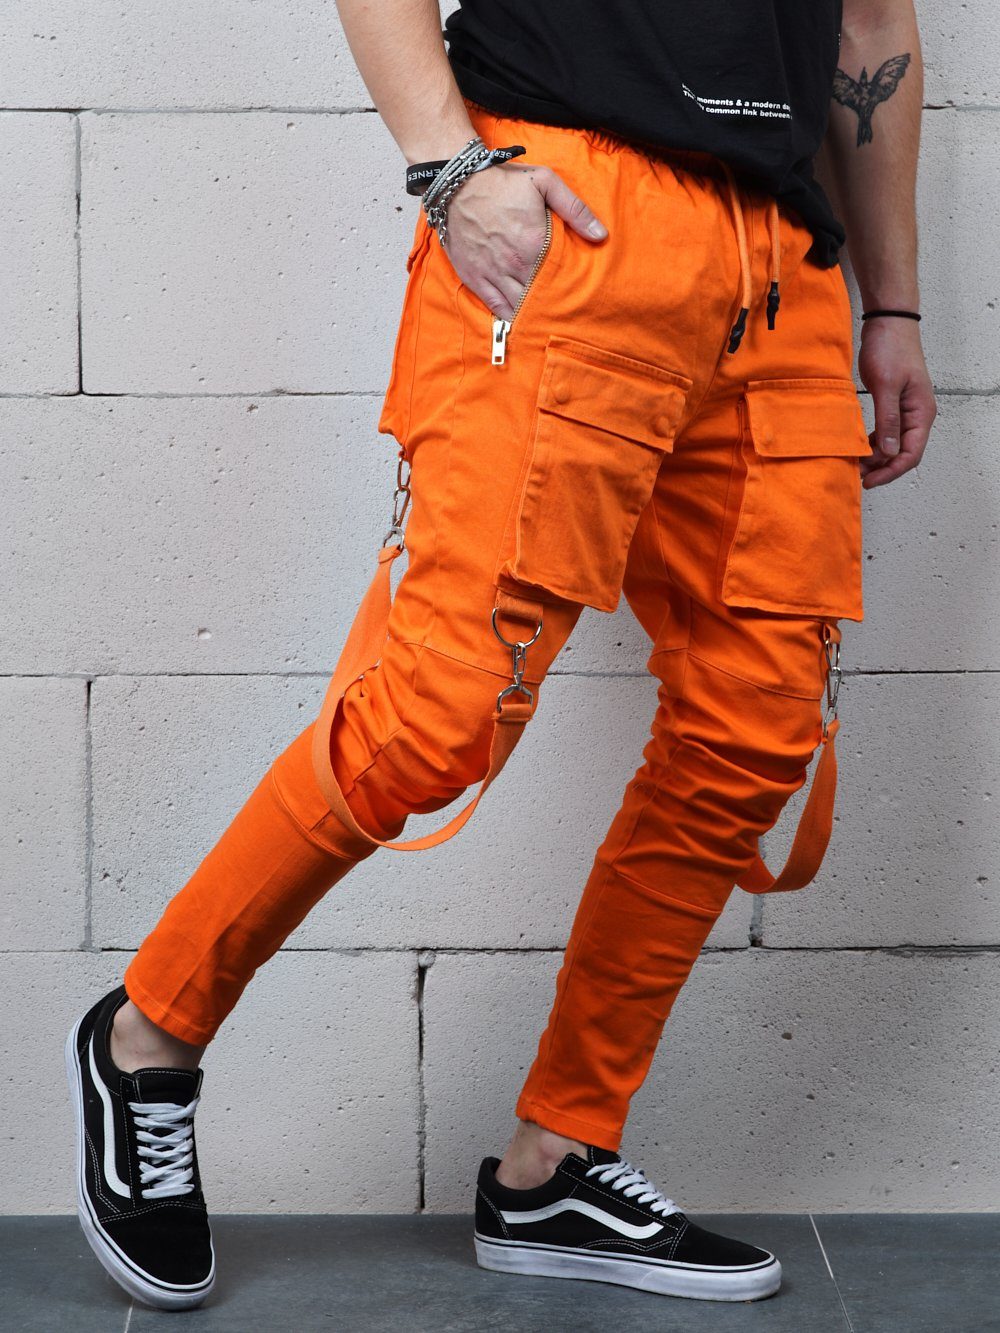 A man wearing the ORANGE BRONX cargo pants and black sneakers.